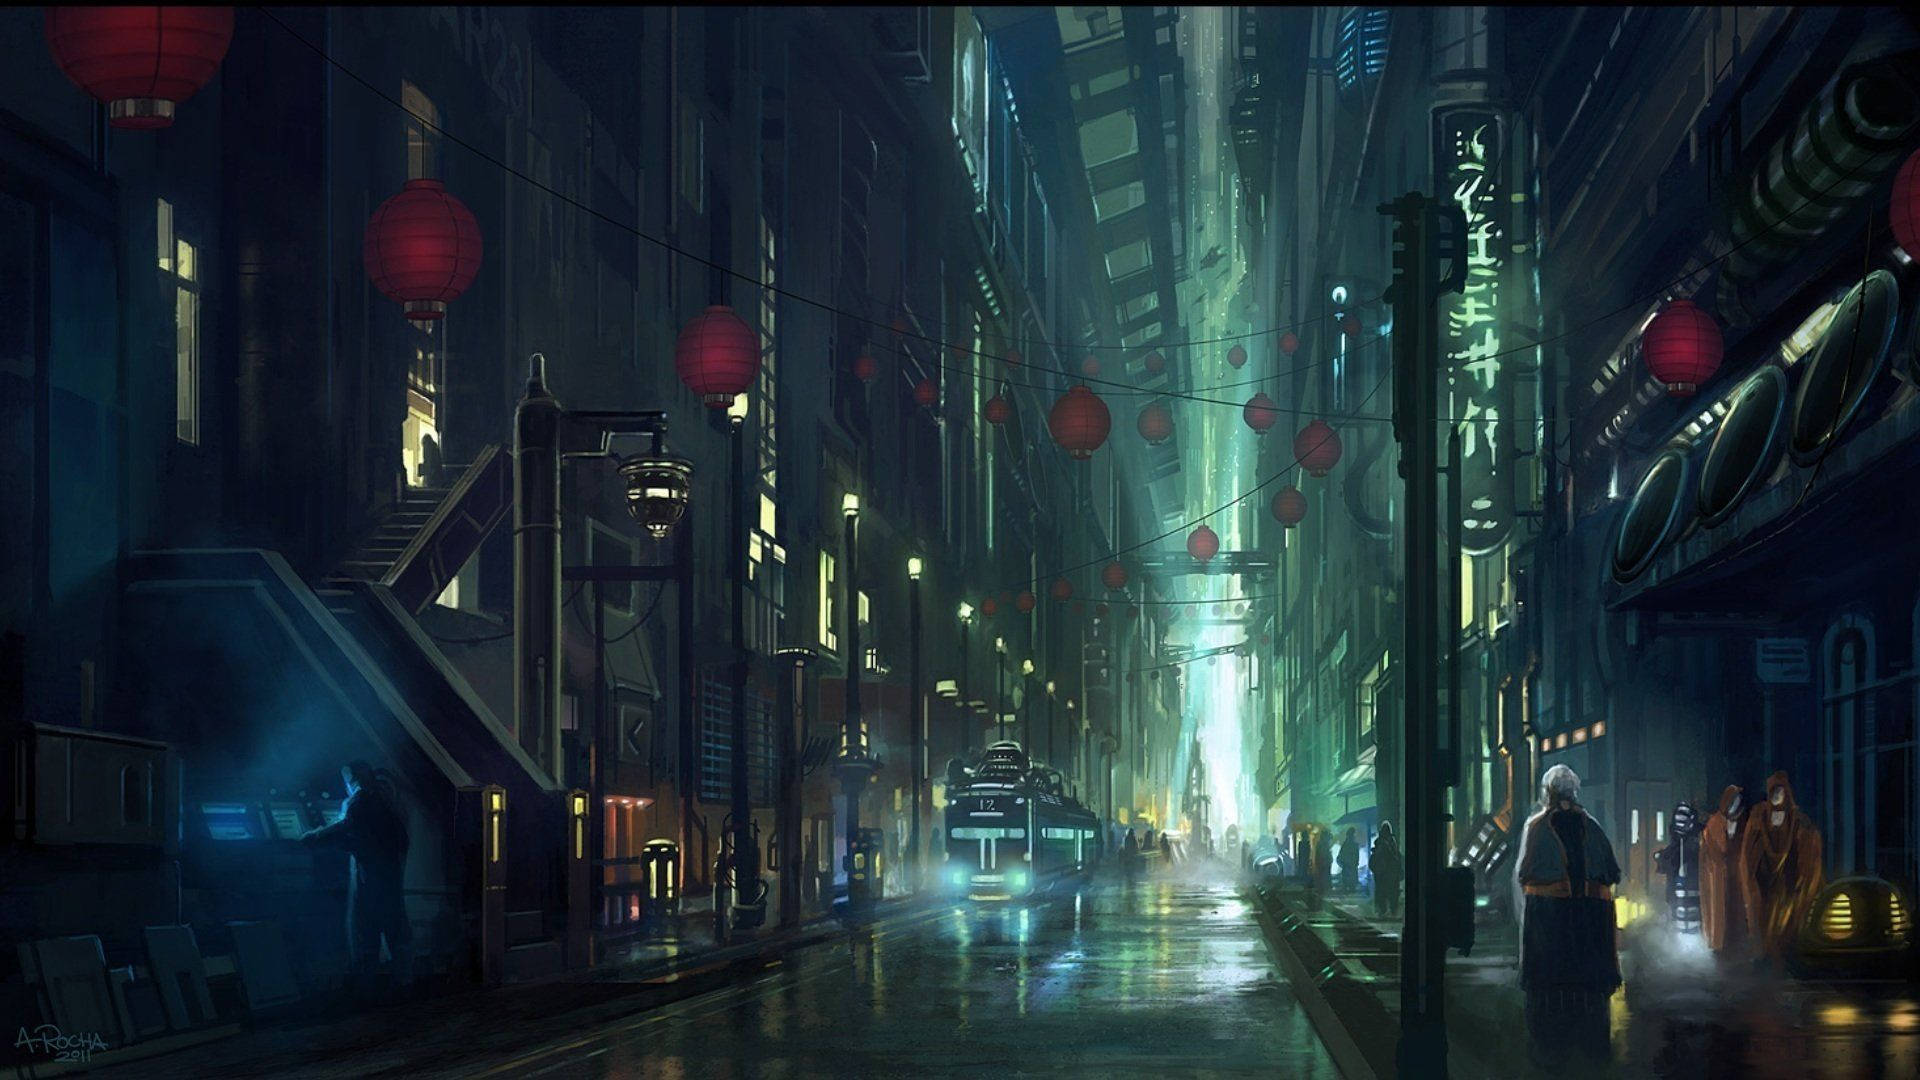 Step into the future with a glimpse of a Blade Runner cyberpunk city street. Wallpaper